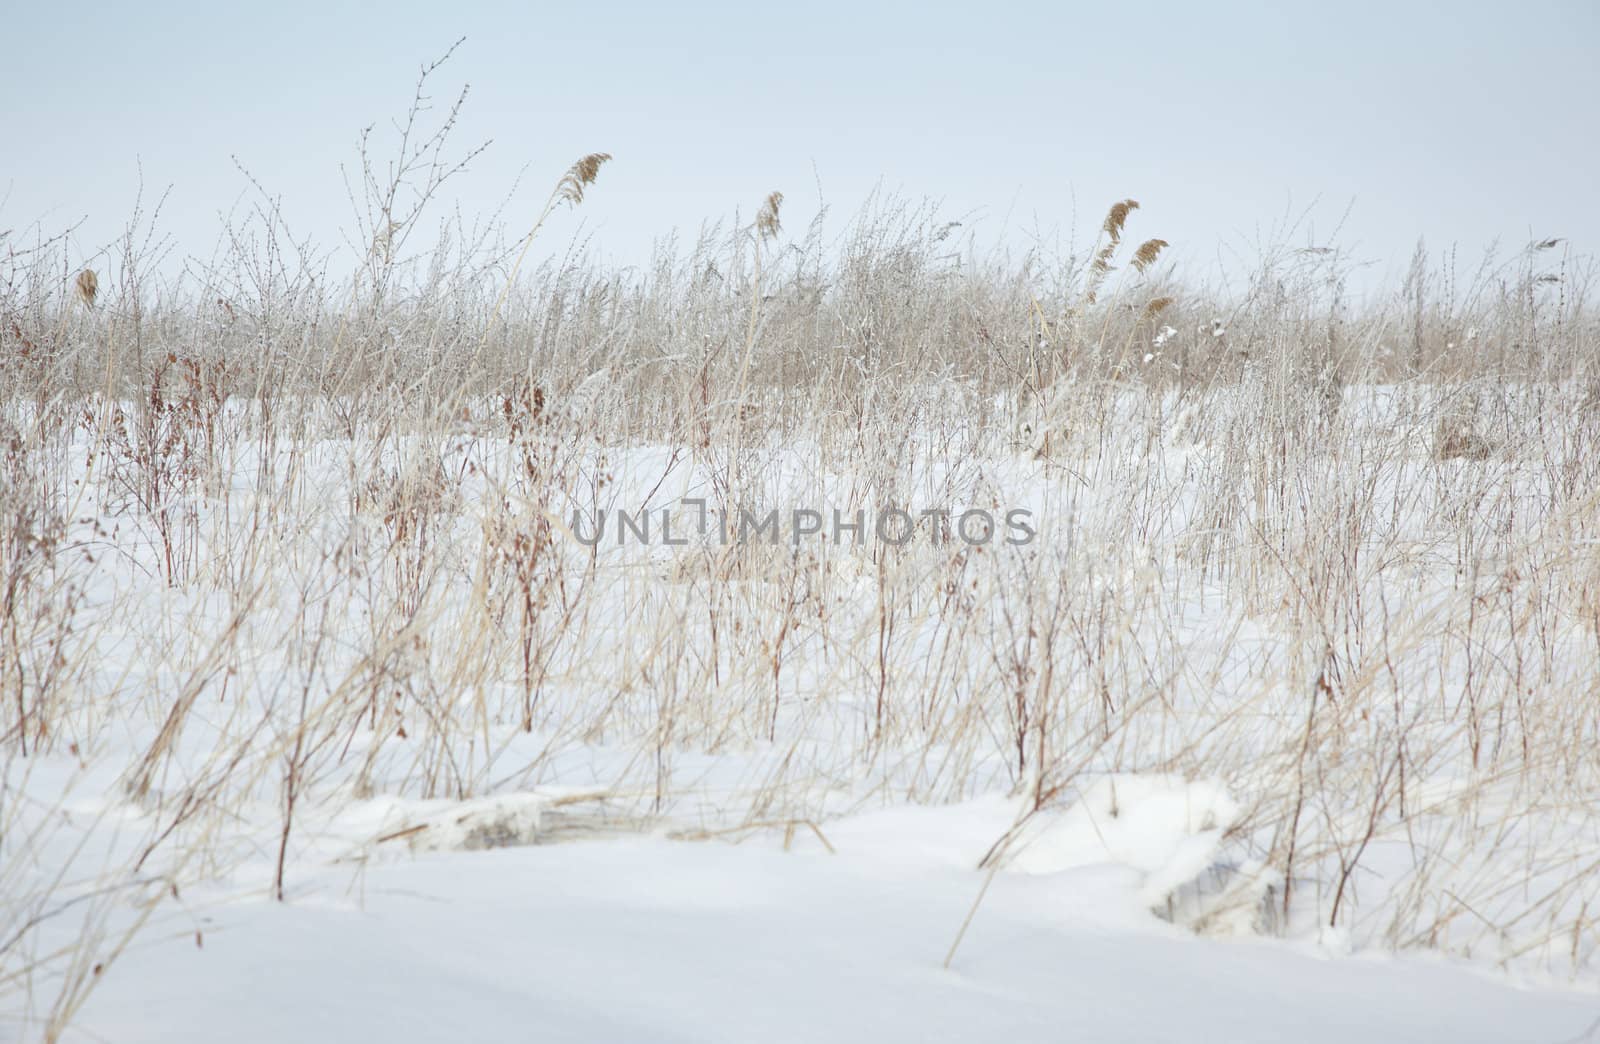 Winter steppe with grass coveed by snow. Horizontal photo